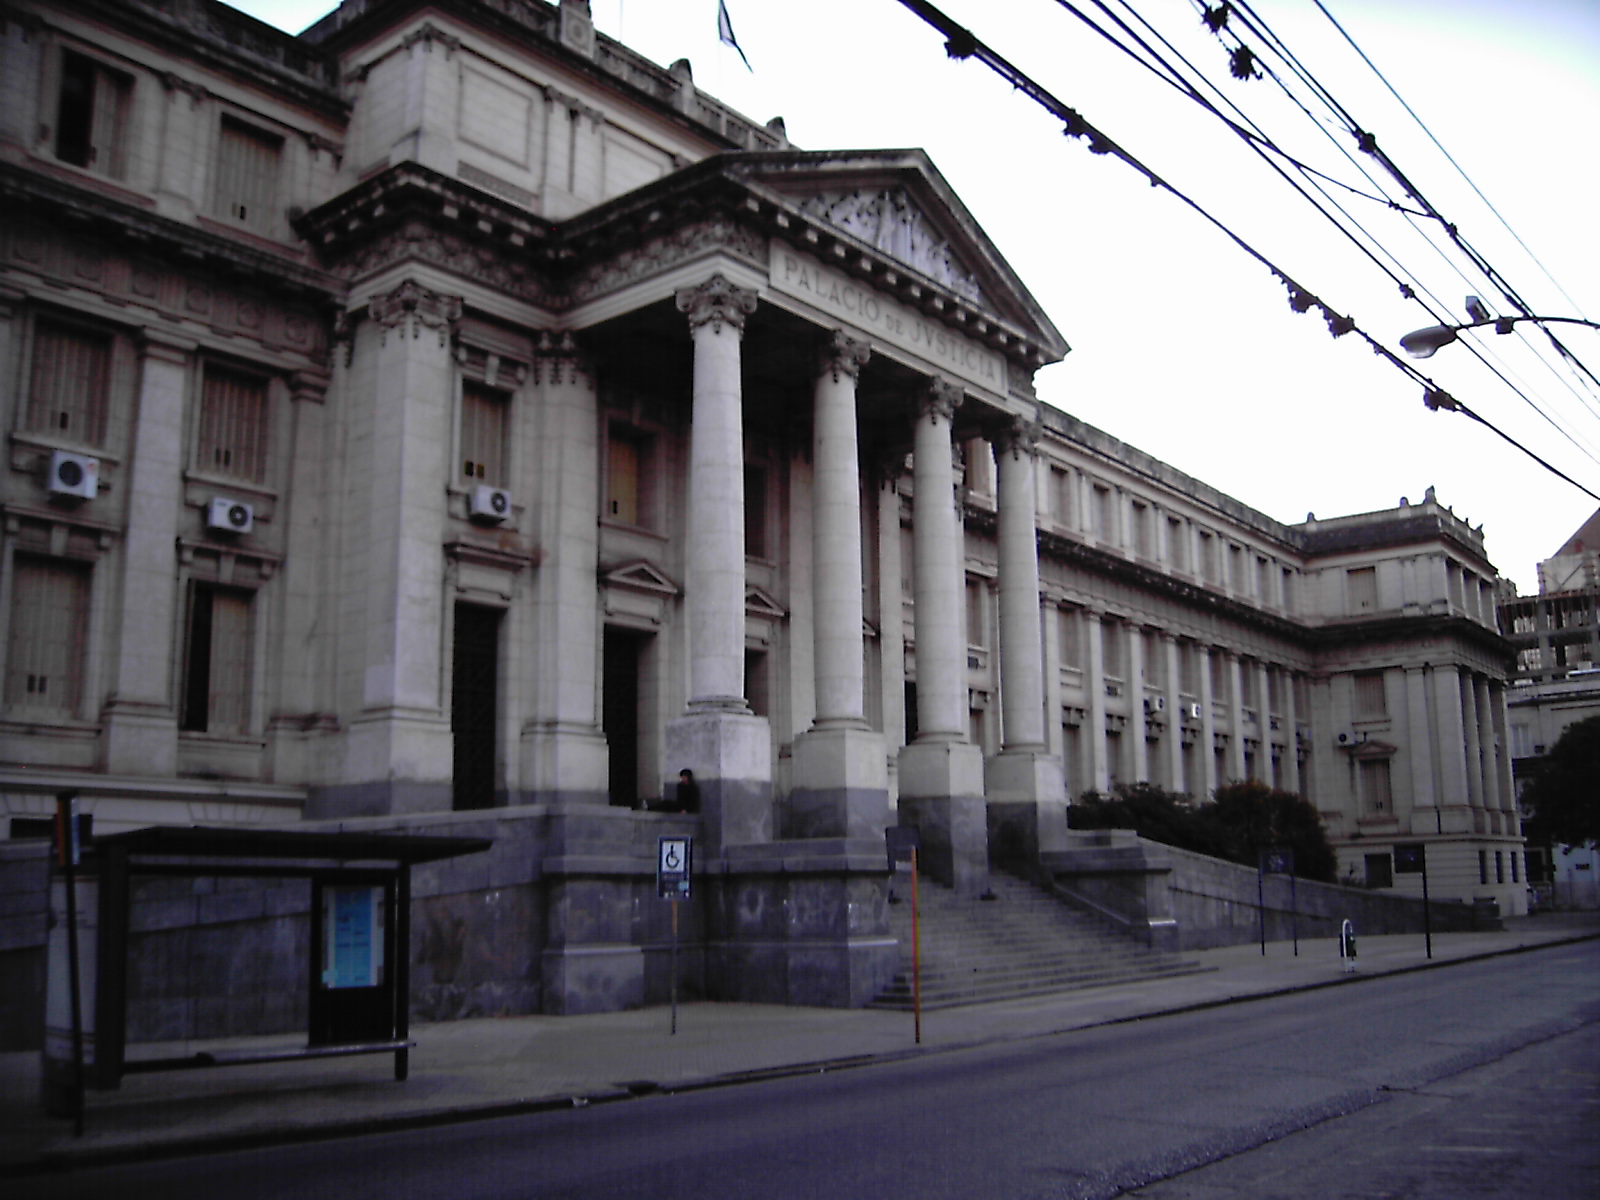 Courthouse in Argentina